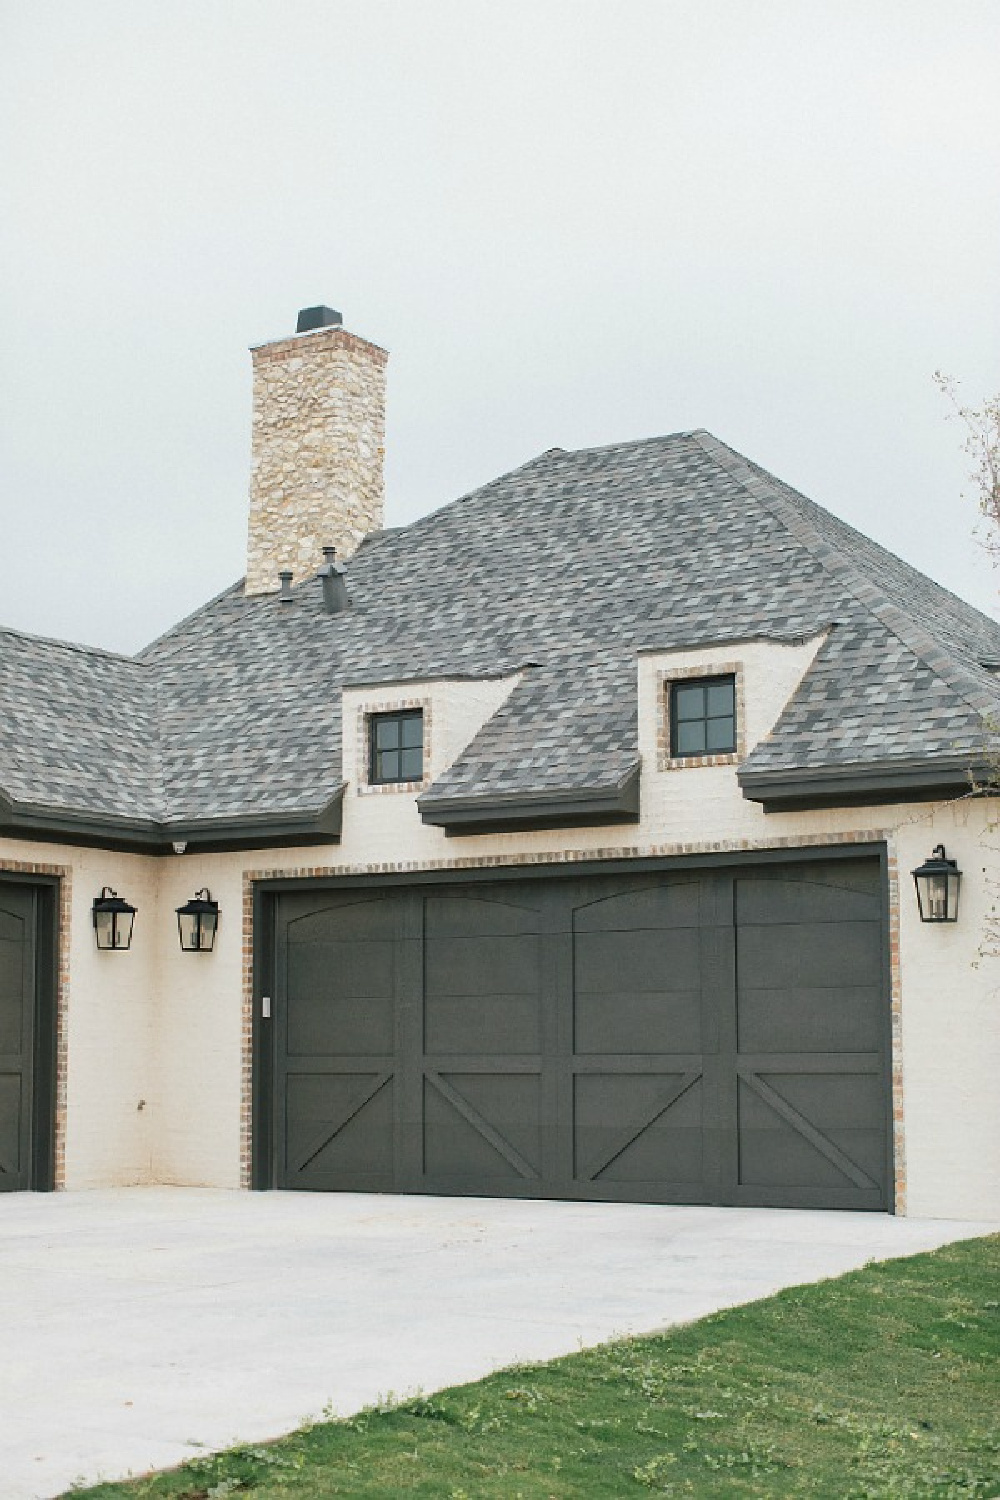 Detail of garage, dormers, and roof on new construction French country home. Brit Jones Photography.